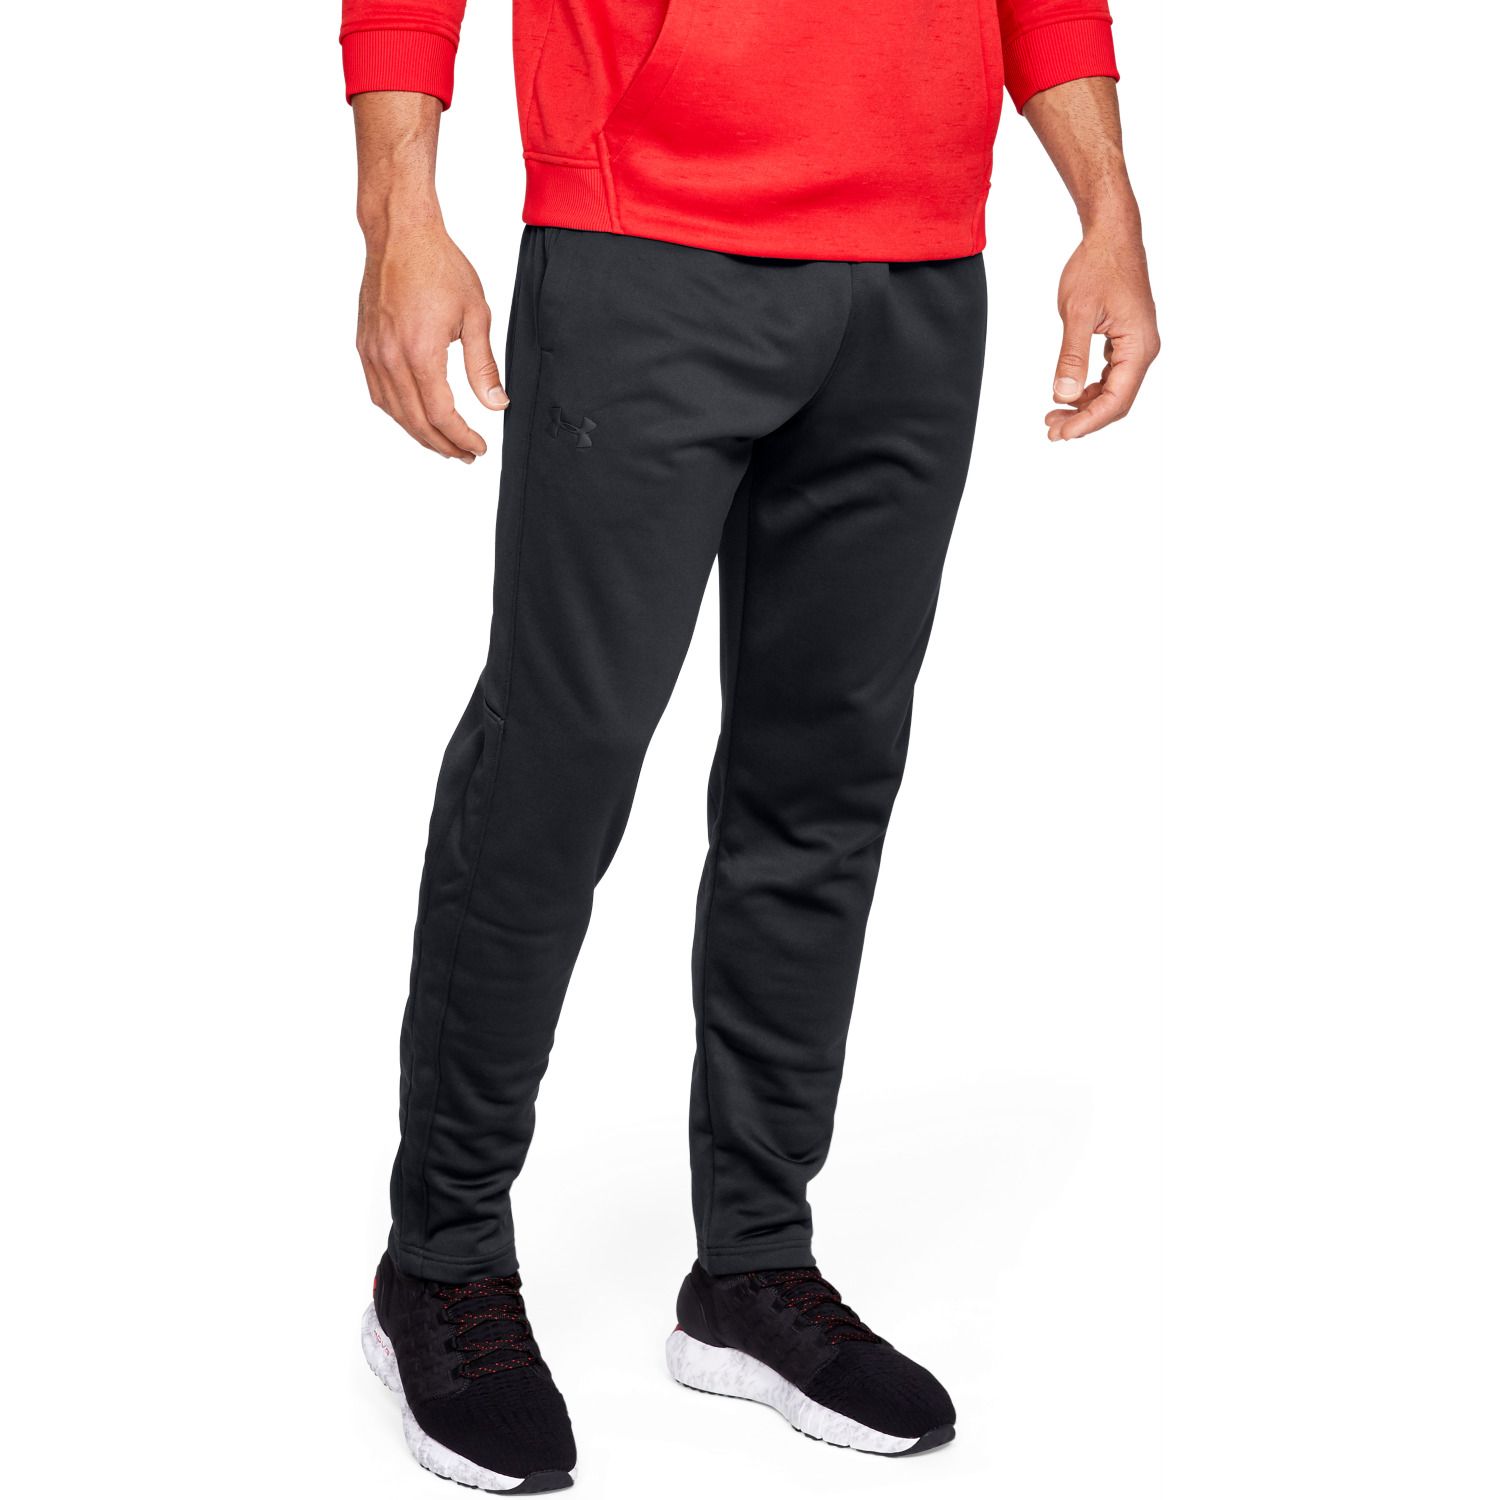 Clearance Men's Under Armour Clothing 